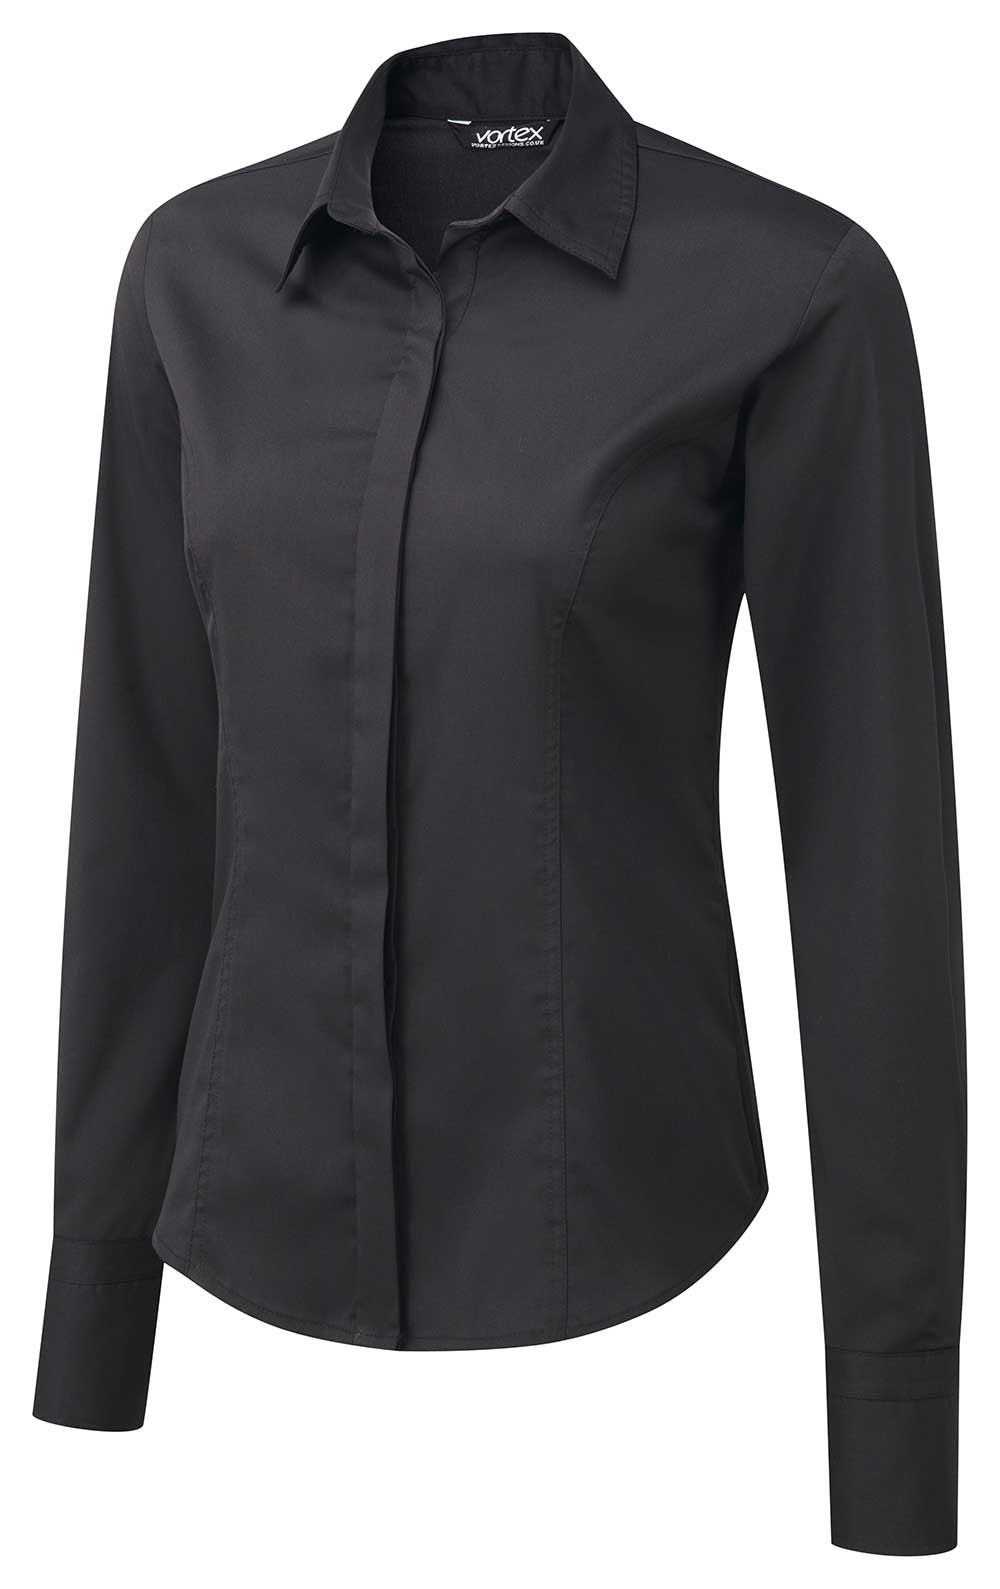 Women's Blouses & Tops | Corporate Clothing, Uniforms & Workwear ...